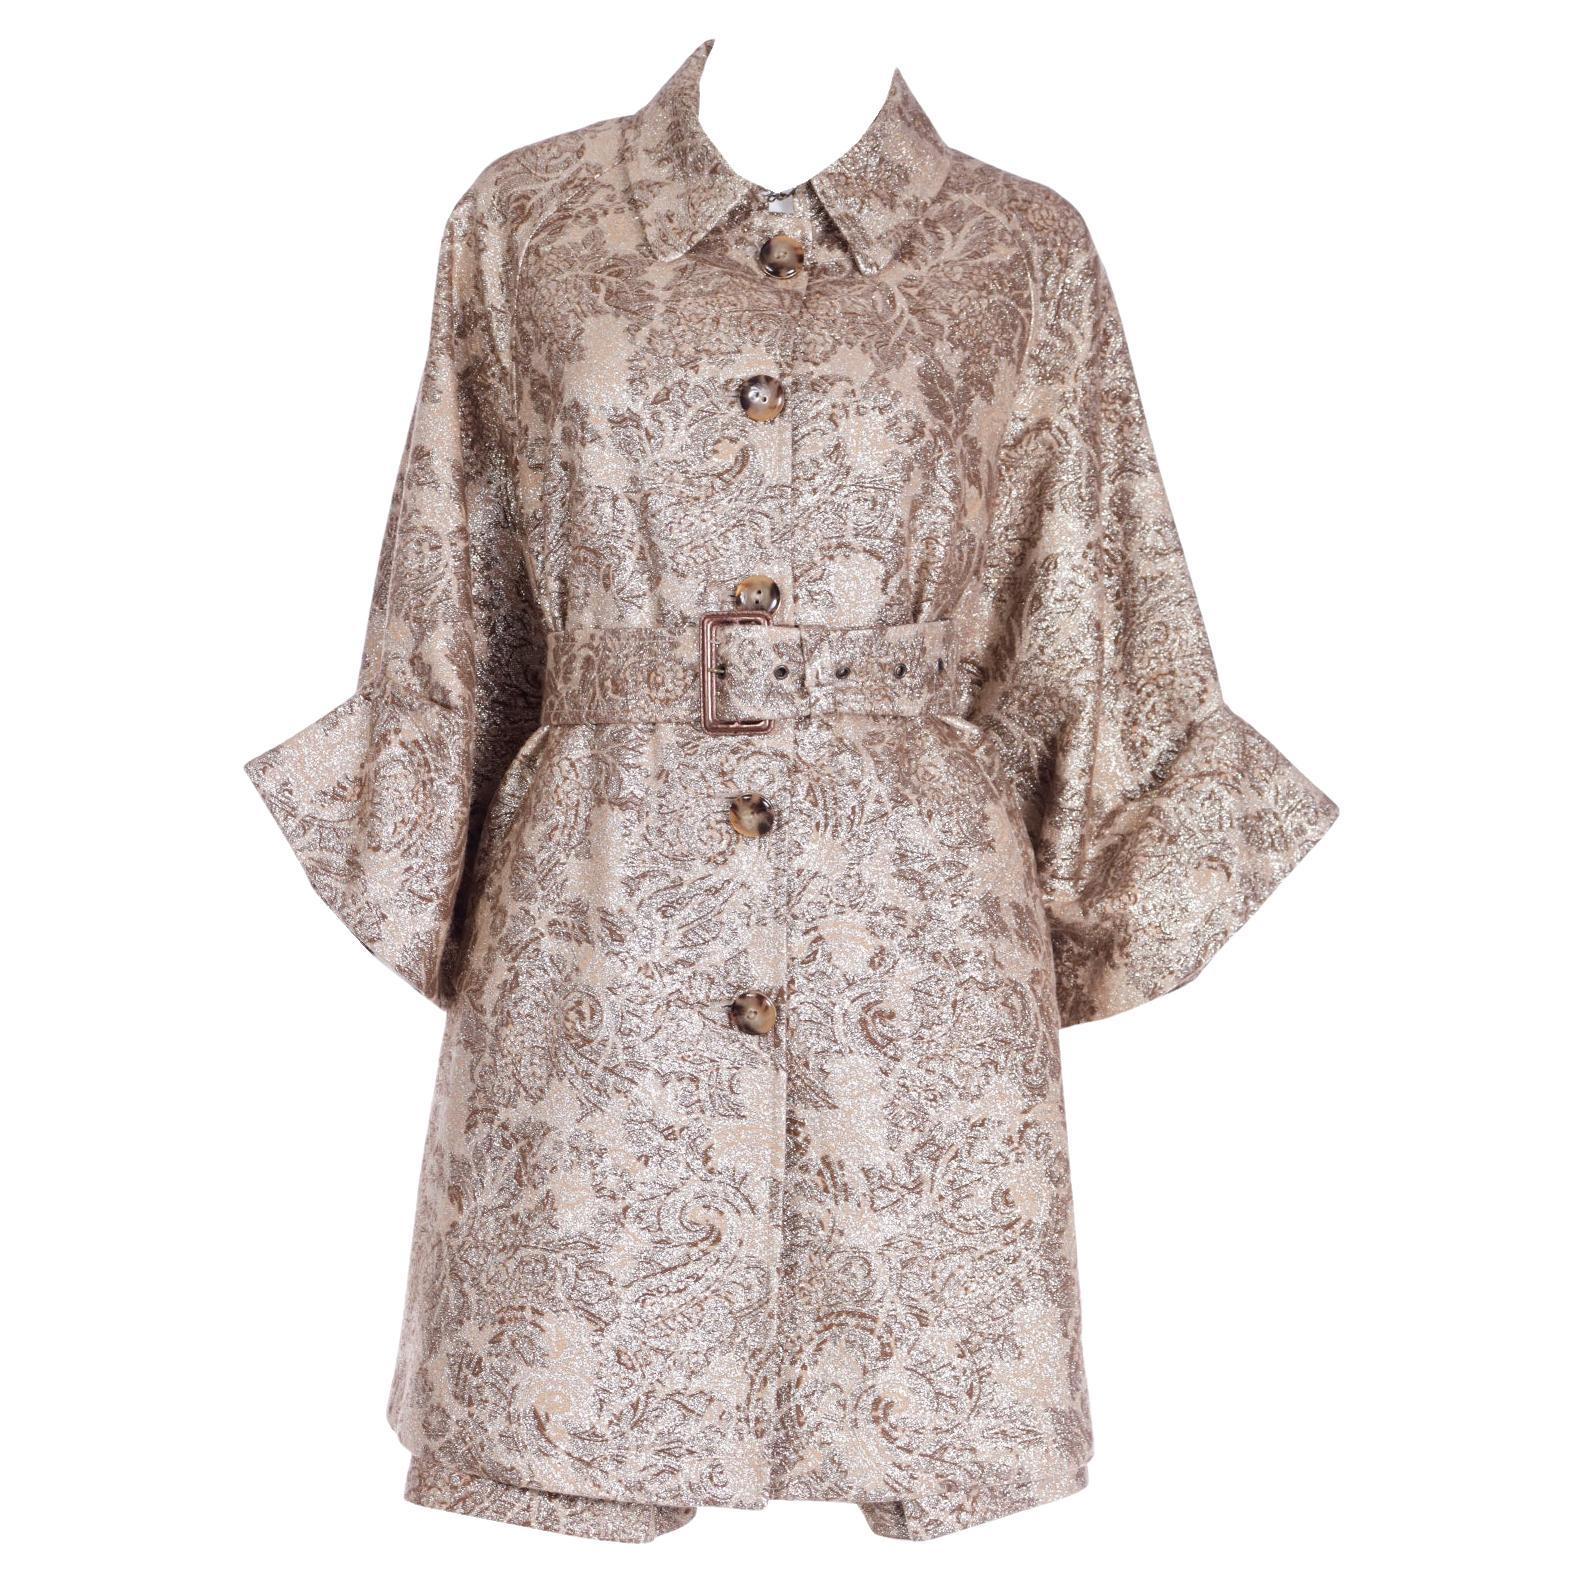 D&G Dolce & Gabbana Gold Floral Dress and Coat With Belt Amy Winehouse 2007 For Sale